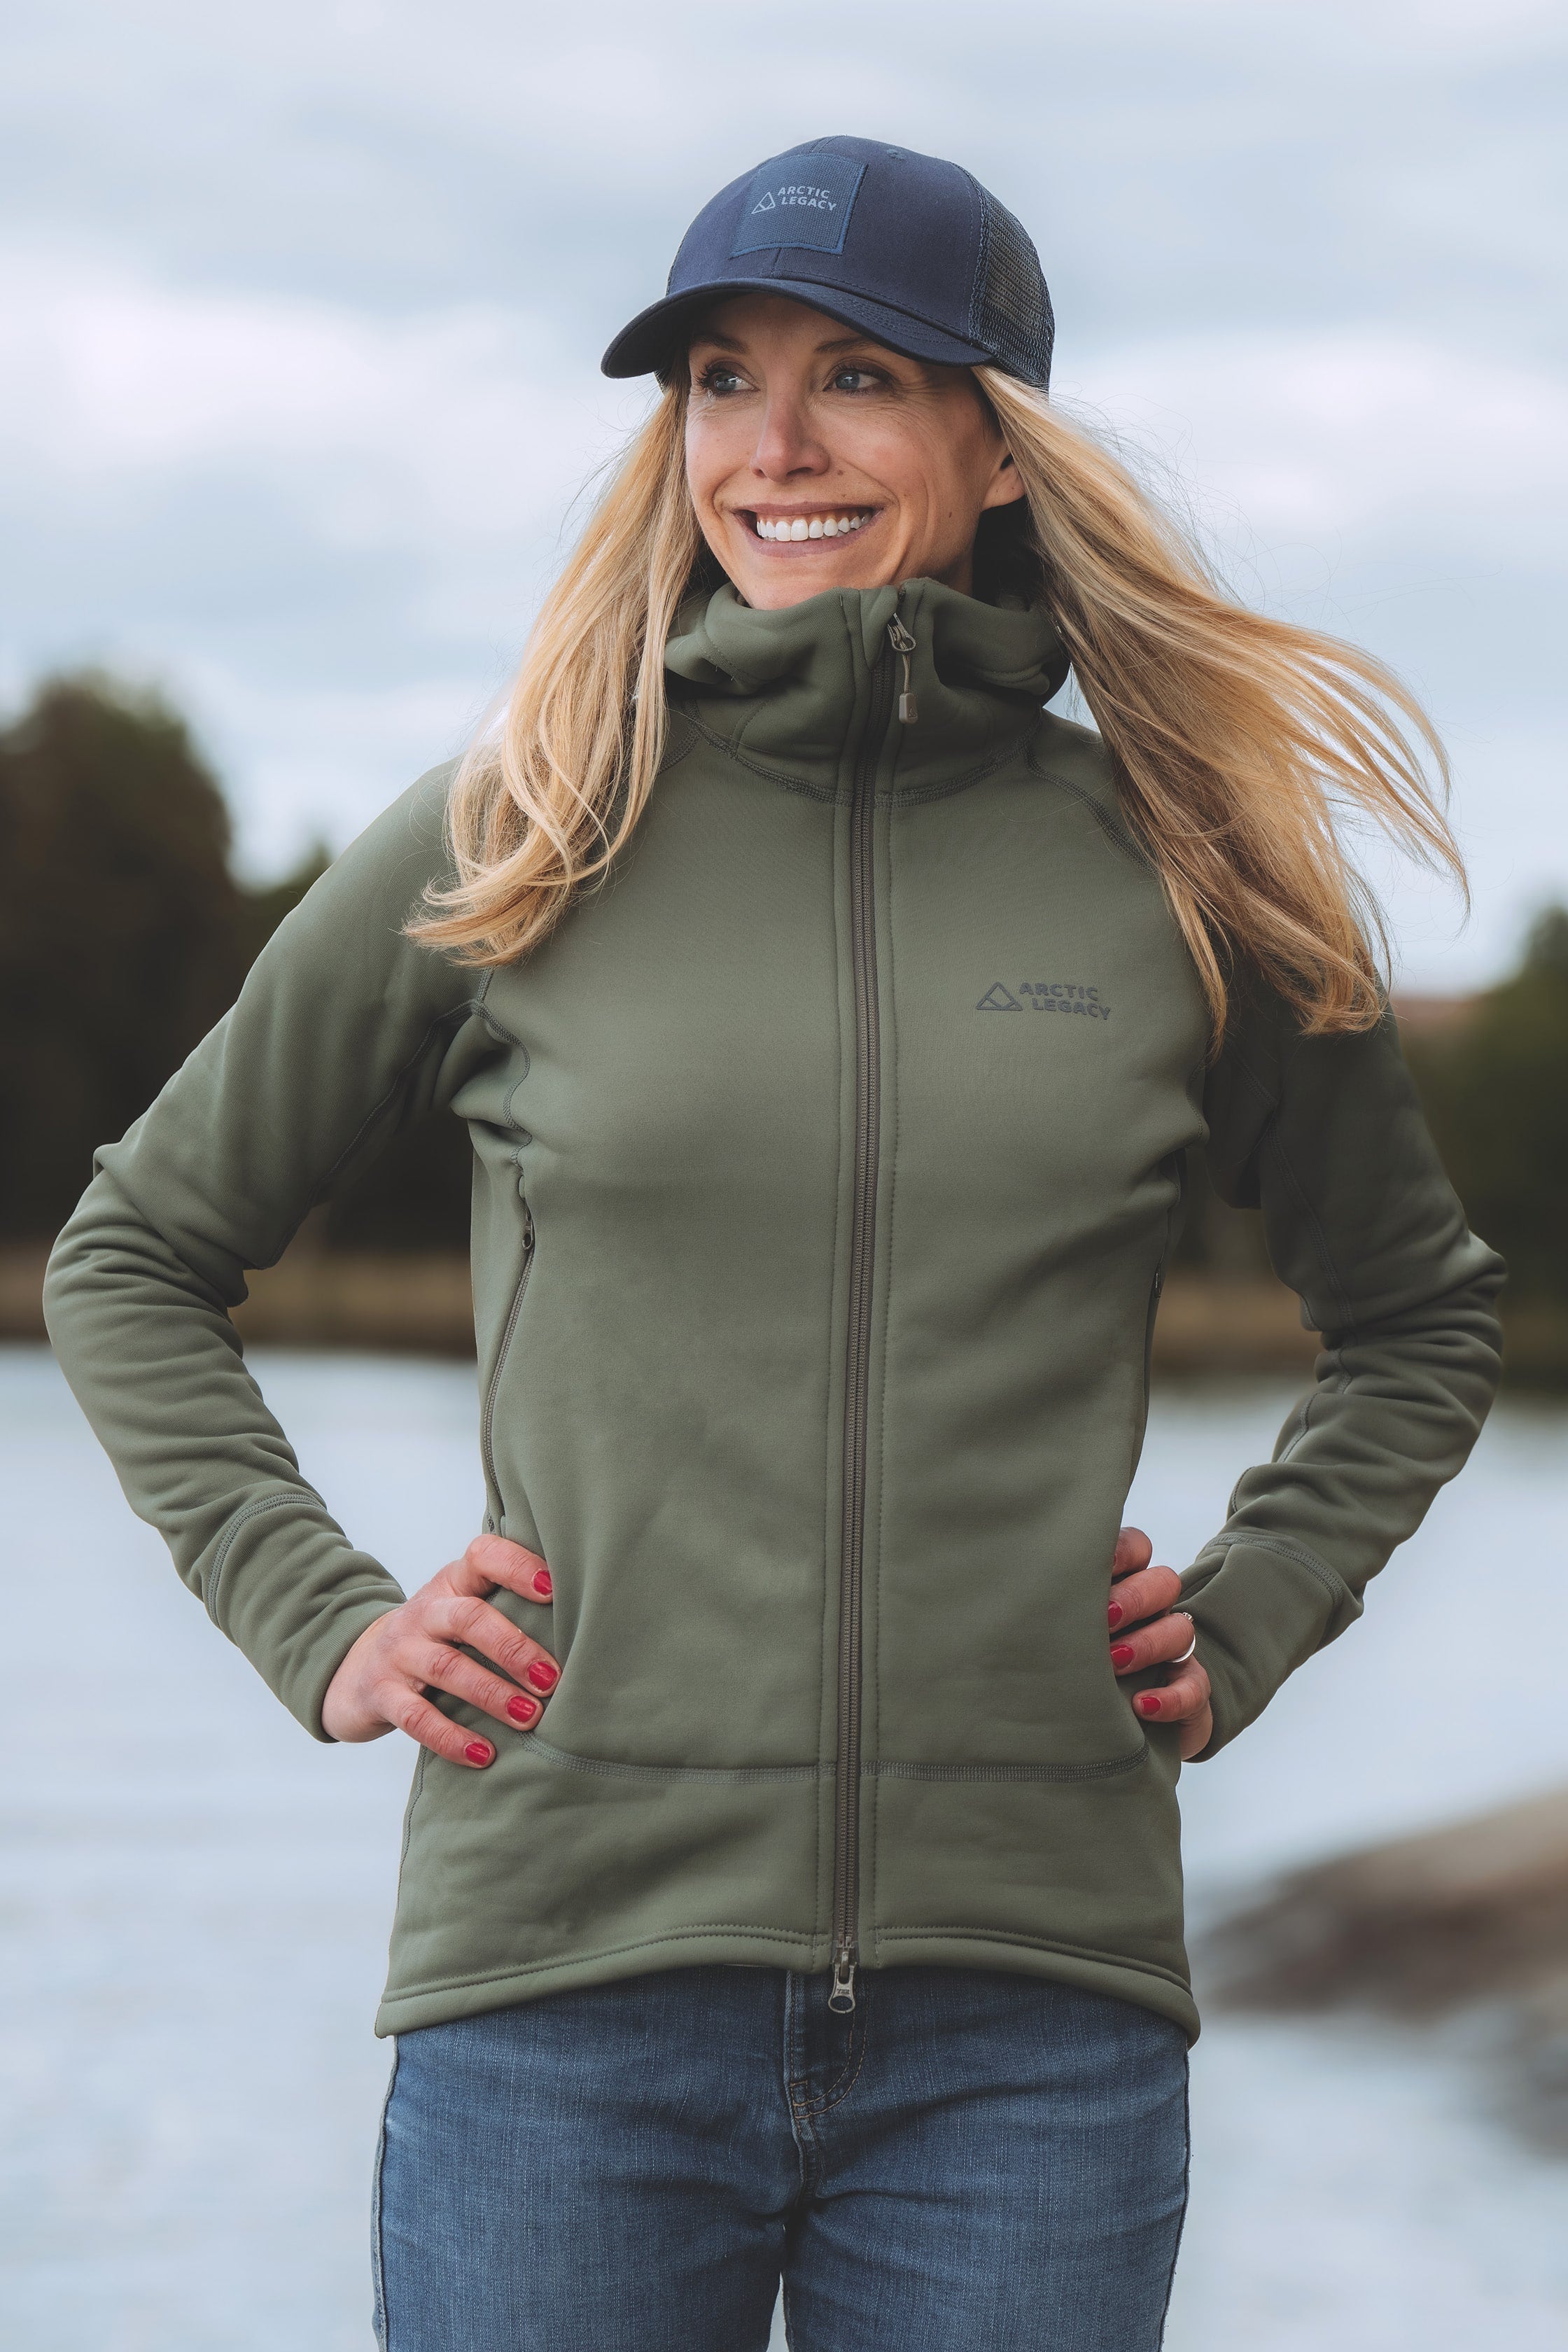 ARCTIC LEGACY® Official - Outdoor Gear Made in Europe – Arctic Legacy